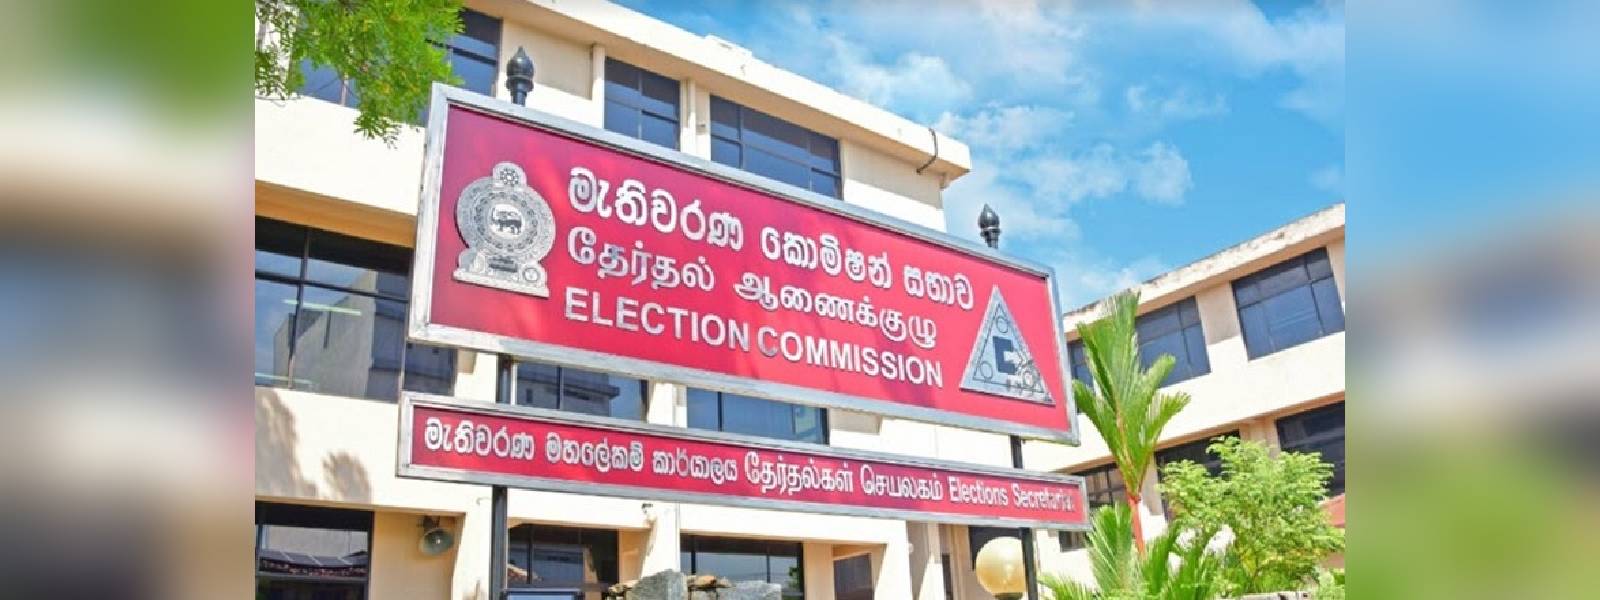 Political parties to meet elections commission